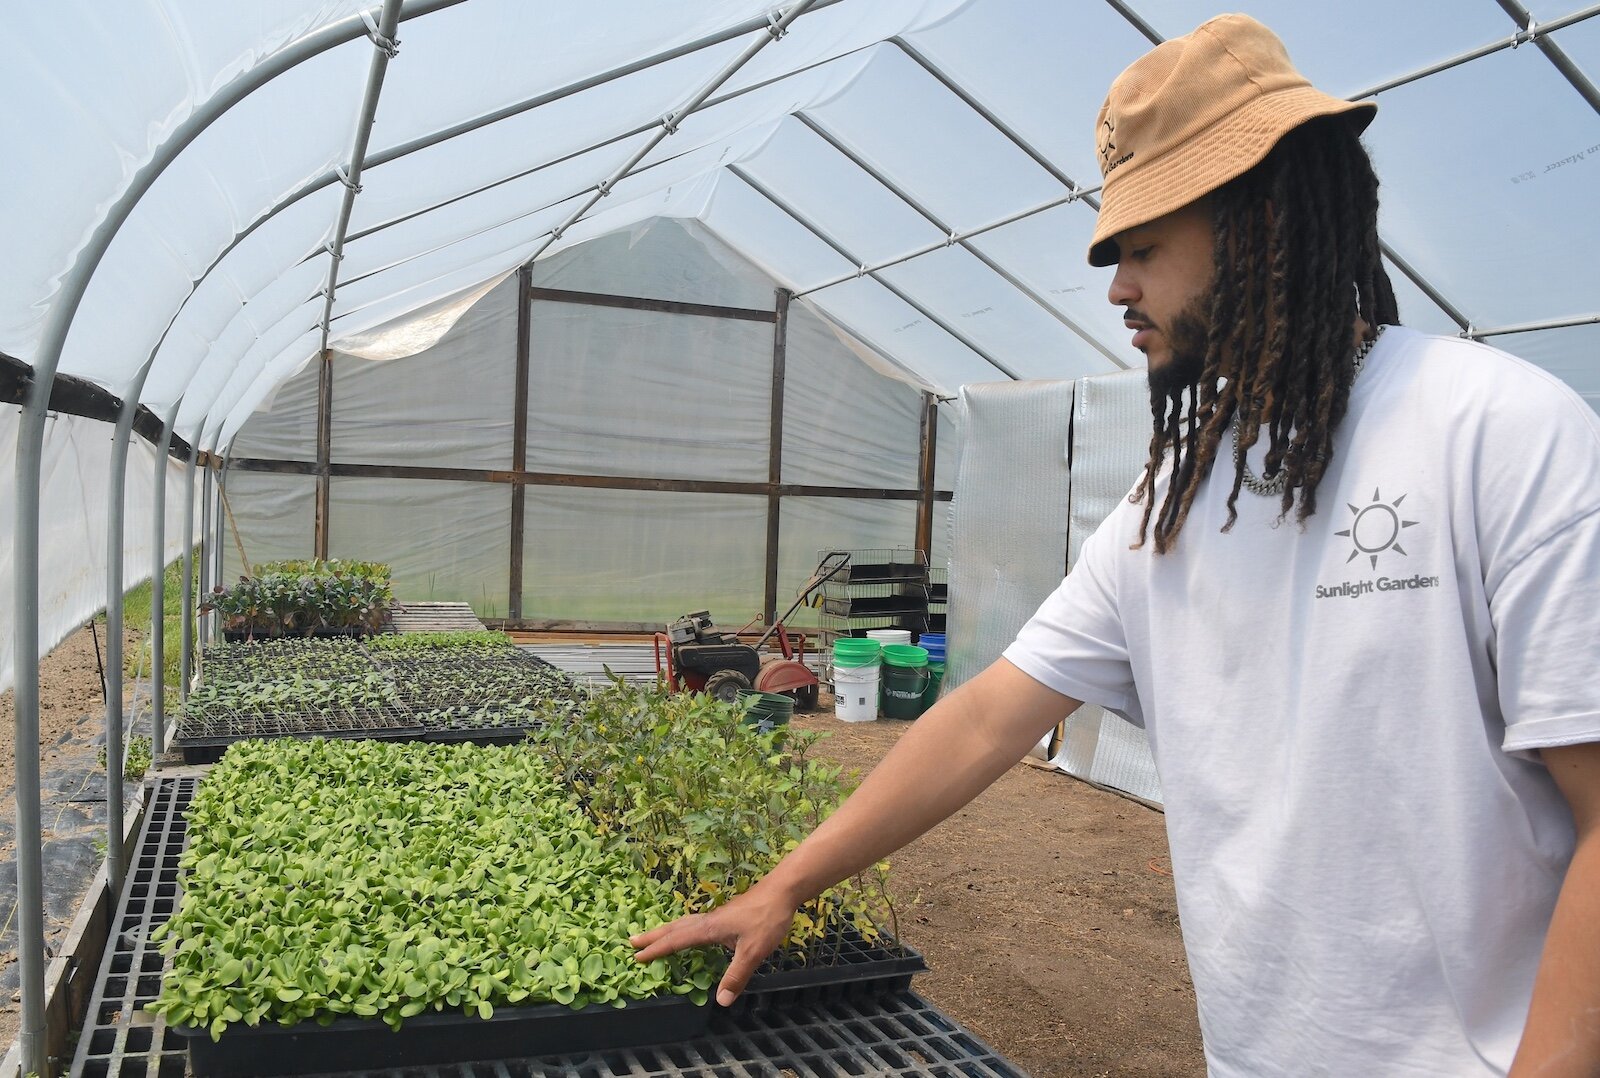 Devon Wilson points out some of the young plants growing in one of the hoop houses at Sunlight Gardens.